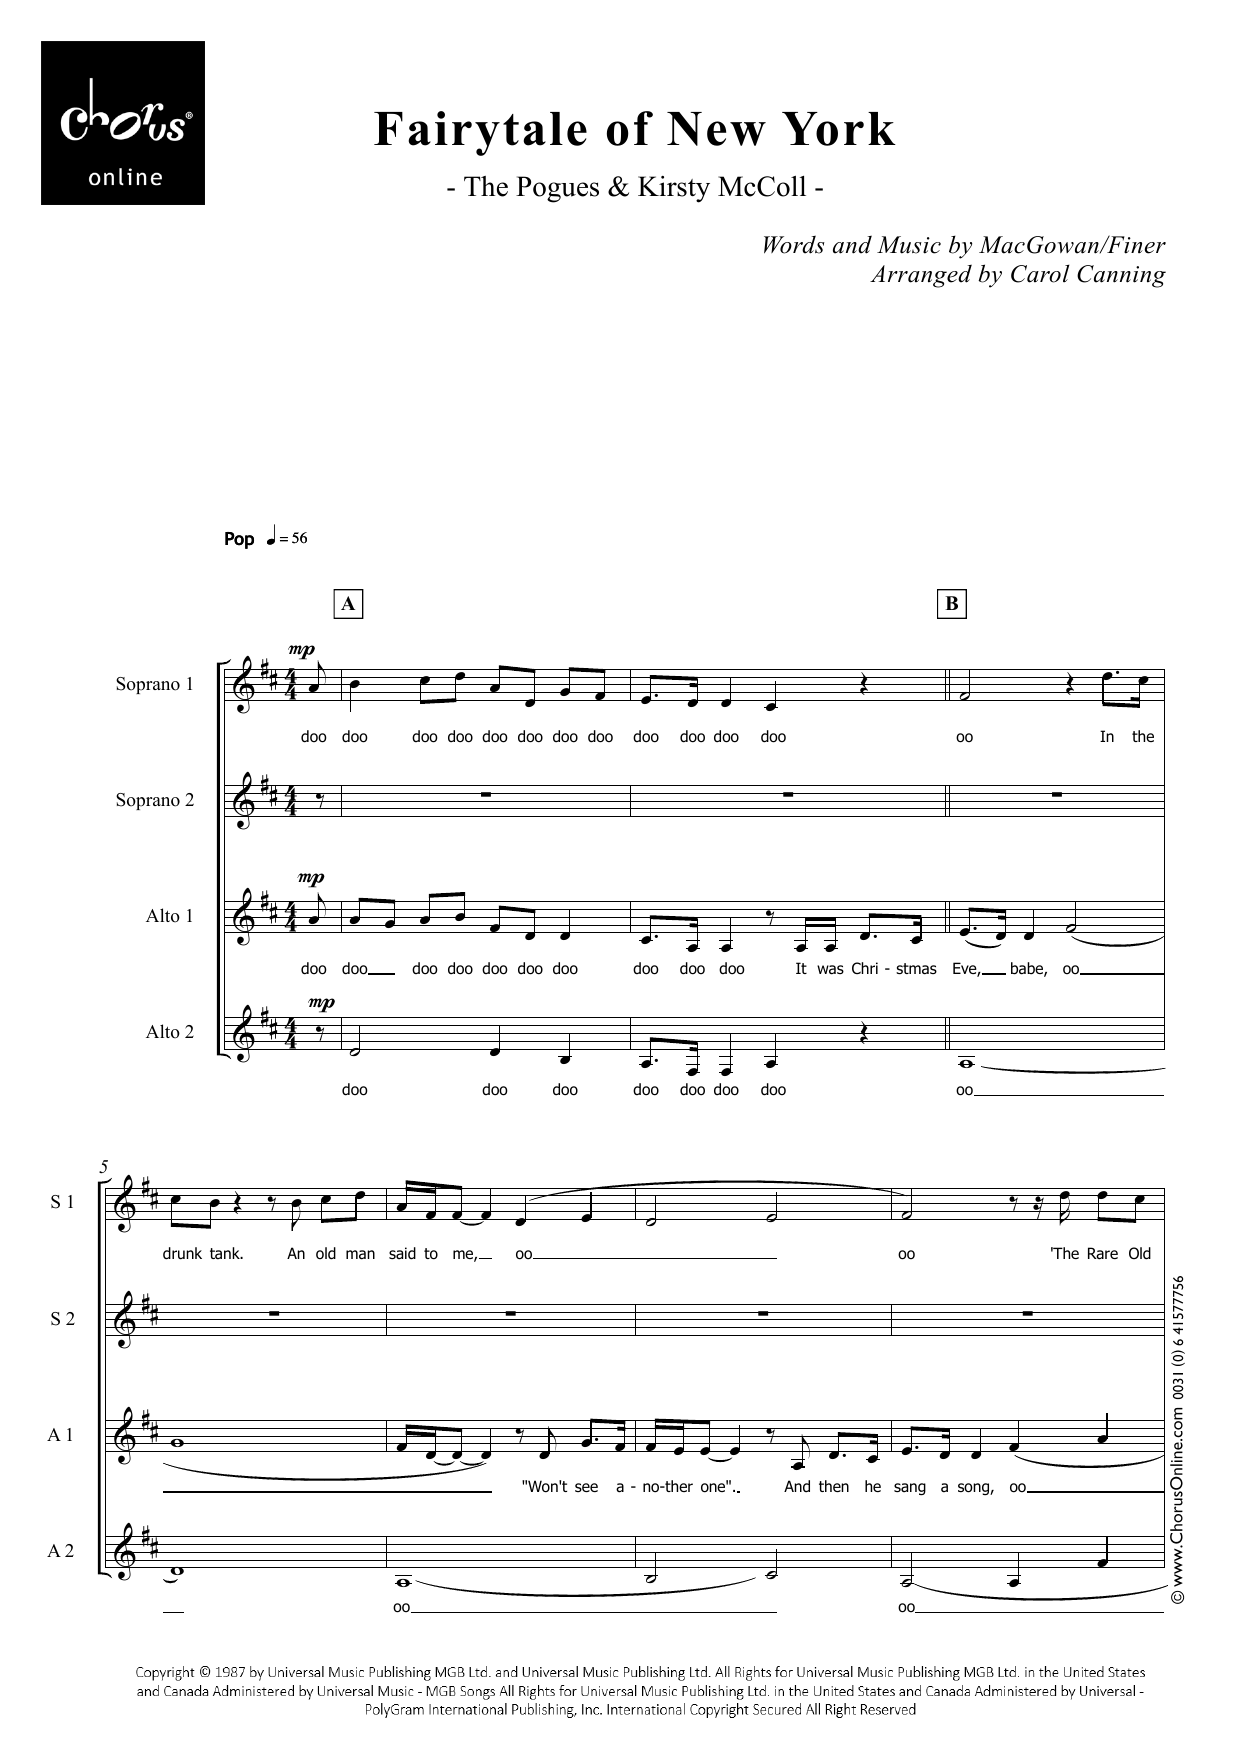 The Pogues Fairytale of New York (arr. Carol Canning) sheet music notes printable PDF score